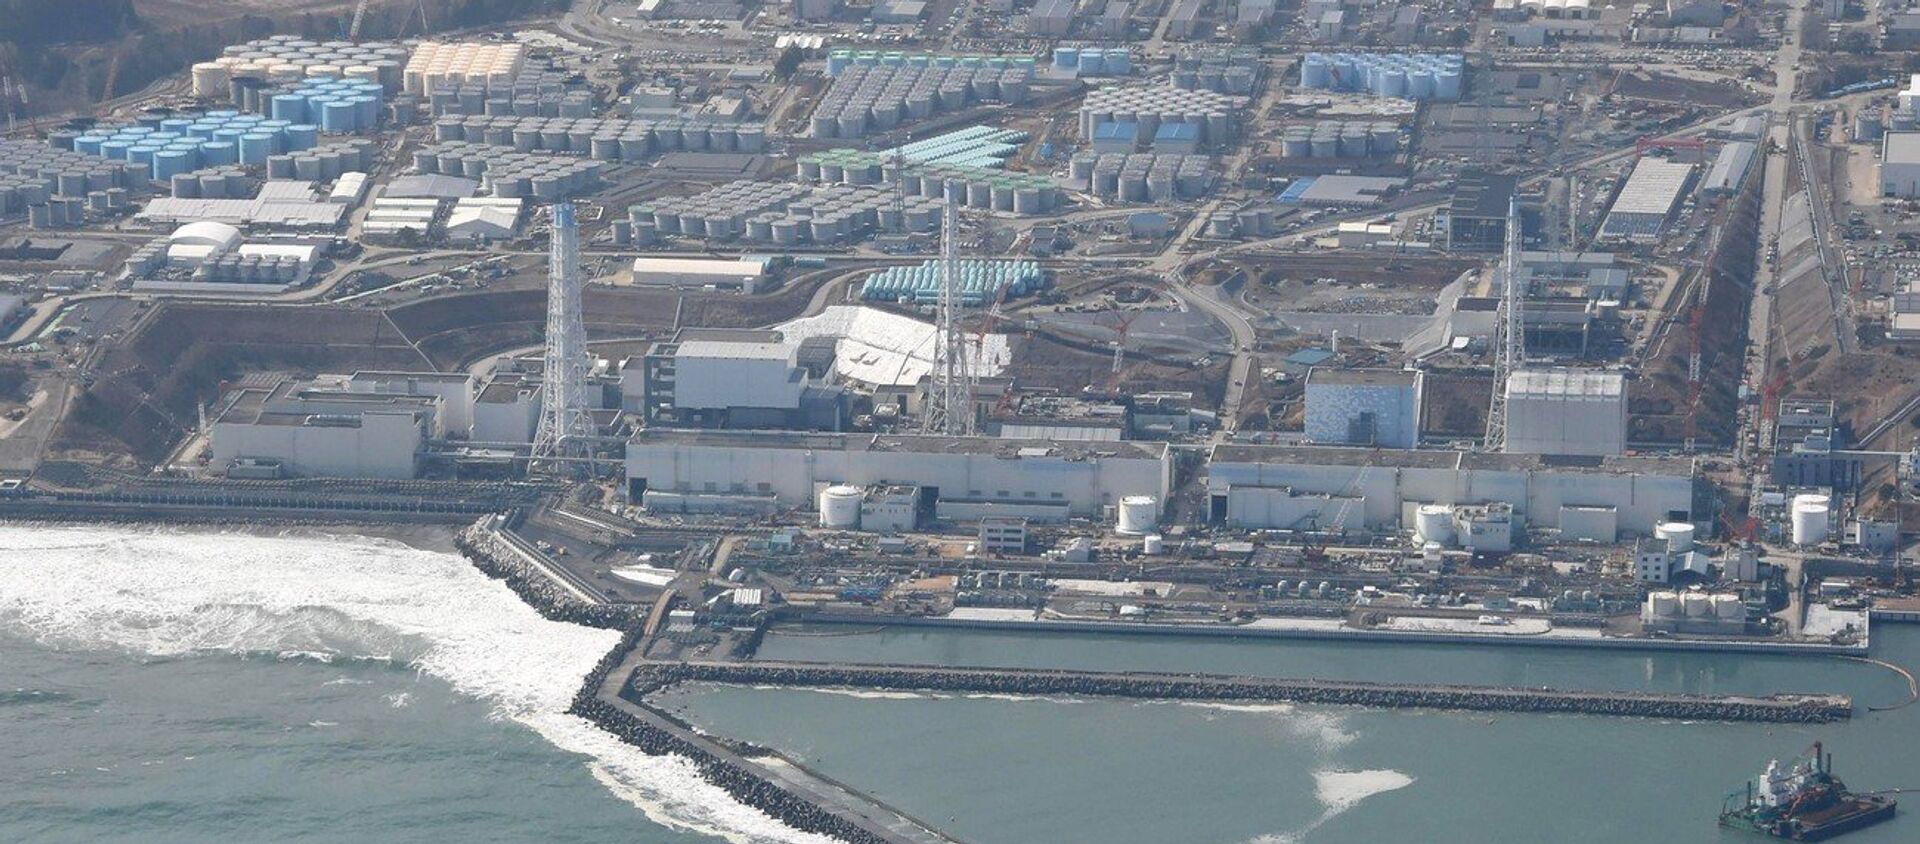 An aerial photo shows the Fukushima No. 1 nuclear power plant being decomissioned in Okuma, Fukushima Prefecture on Feb. 21, 2015, nearly 4 years after the plant diaster. The Fukushima No. 1 nuclear power plant, operated Tokyo Electric Power Co. (TEPCO) , was heavily damaged by a hydrogen explosion following the March 2011 Great East Japan Earthquake and the ensuing tsunami. TEPCO has worked to remove the e radioactive spent fuel from the crippled plant.  - Sputnik International, 1920, 13.04.2021